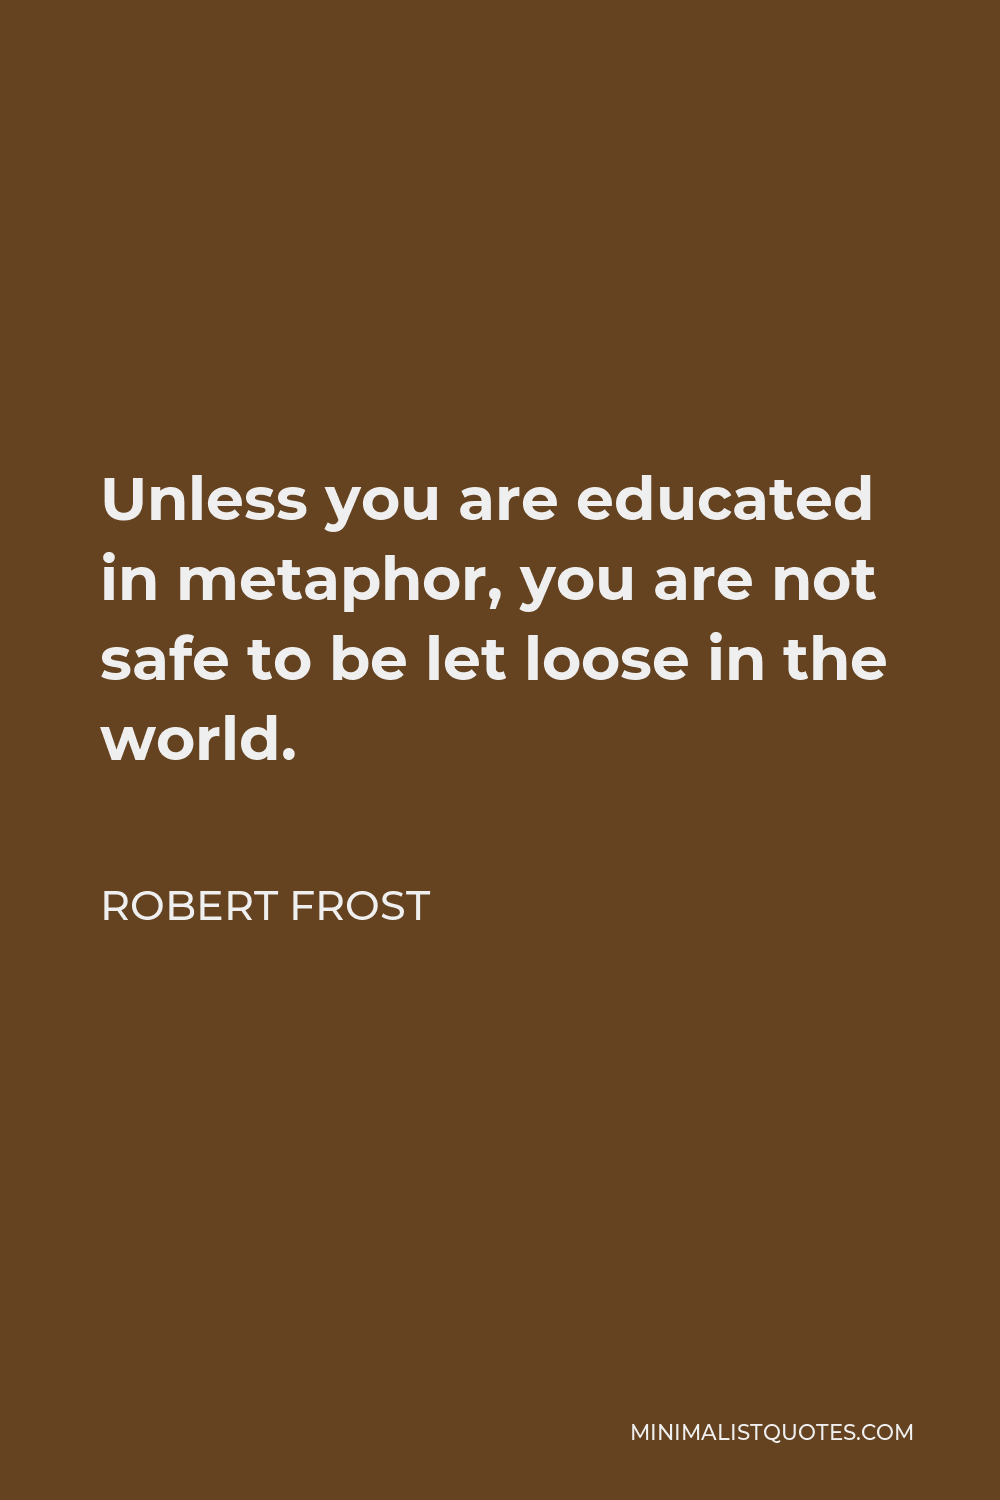 Robert Frost Quote - Unless you are educated in metaphor, you are not safe to be let loose in the world.